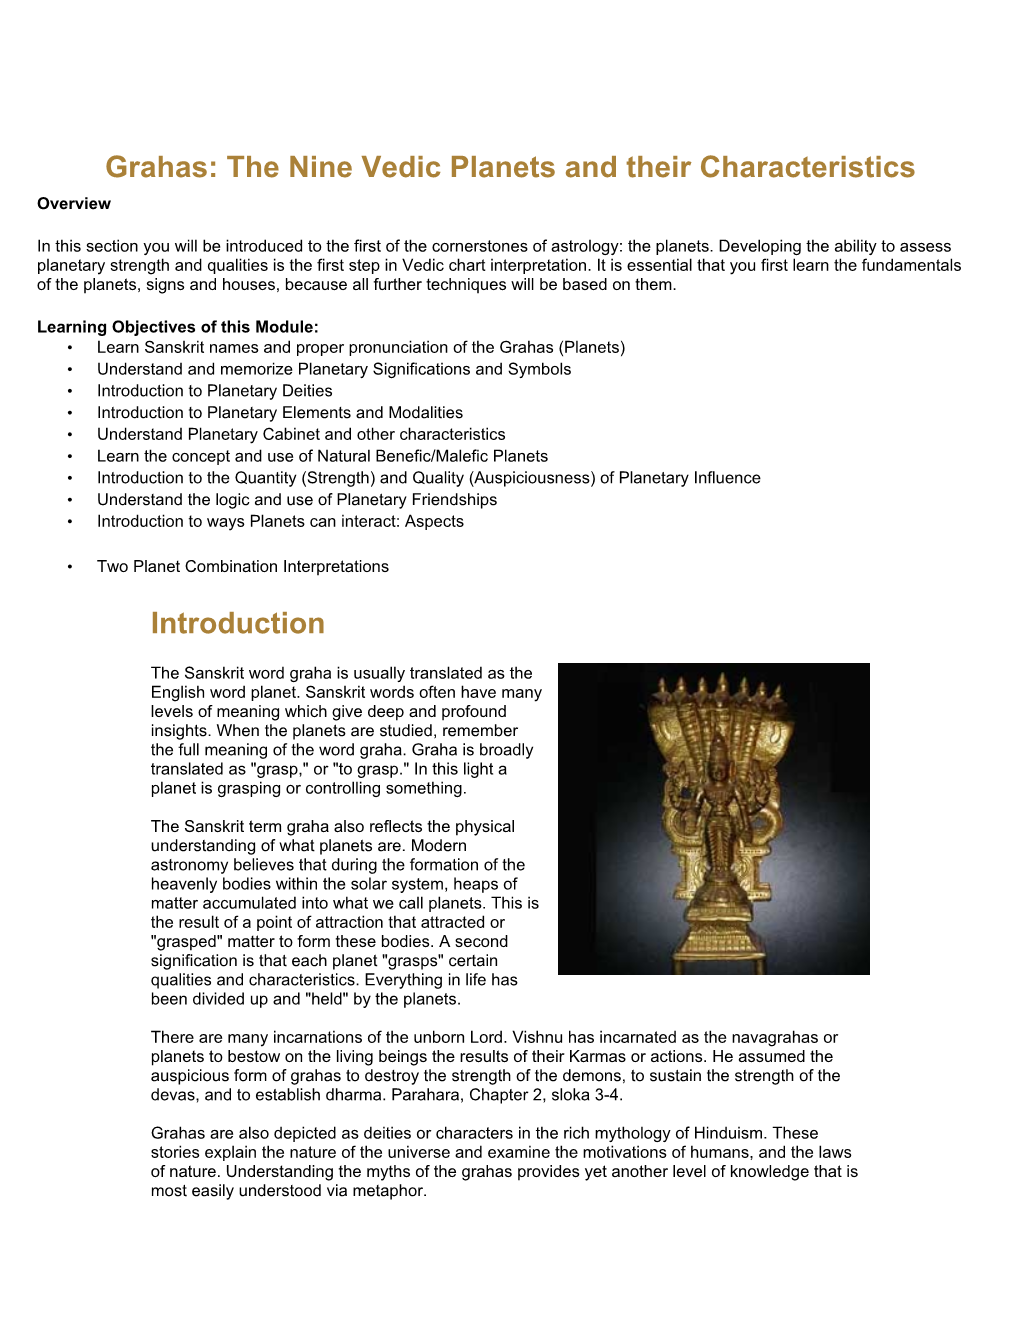 Grahas: the Nine Vedic Planets and Their Characteristics Introduction